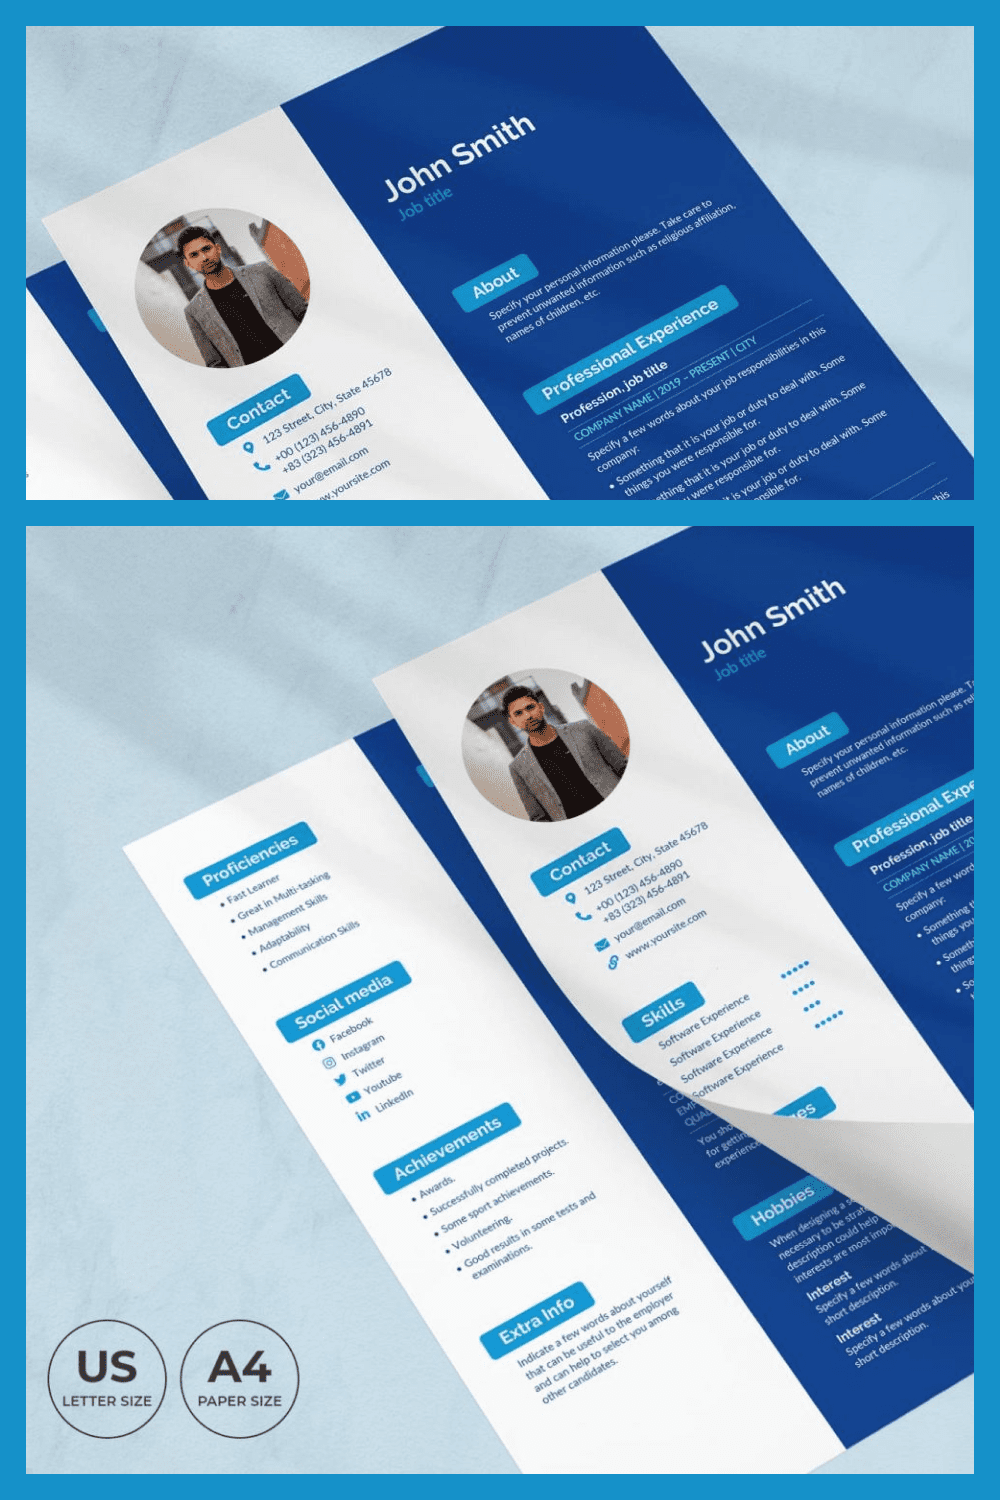 Blue and white resume with a blue background.